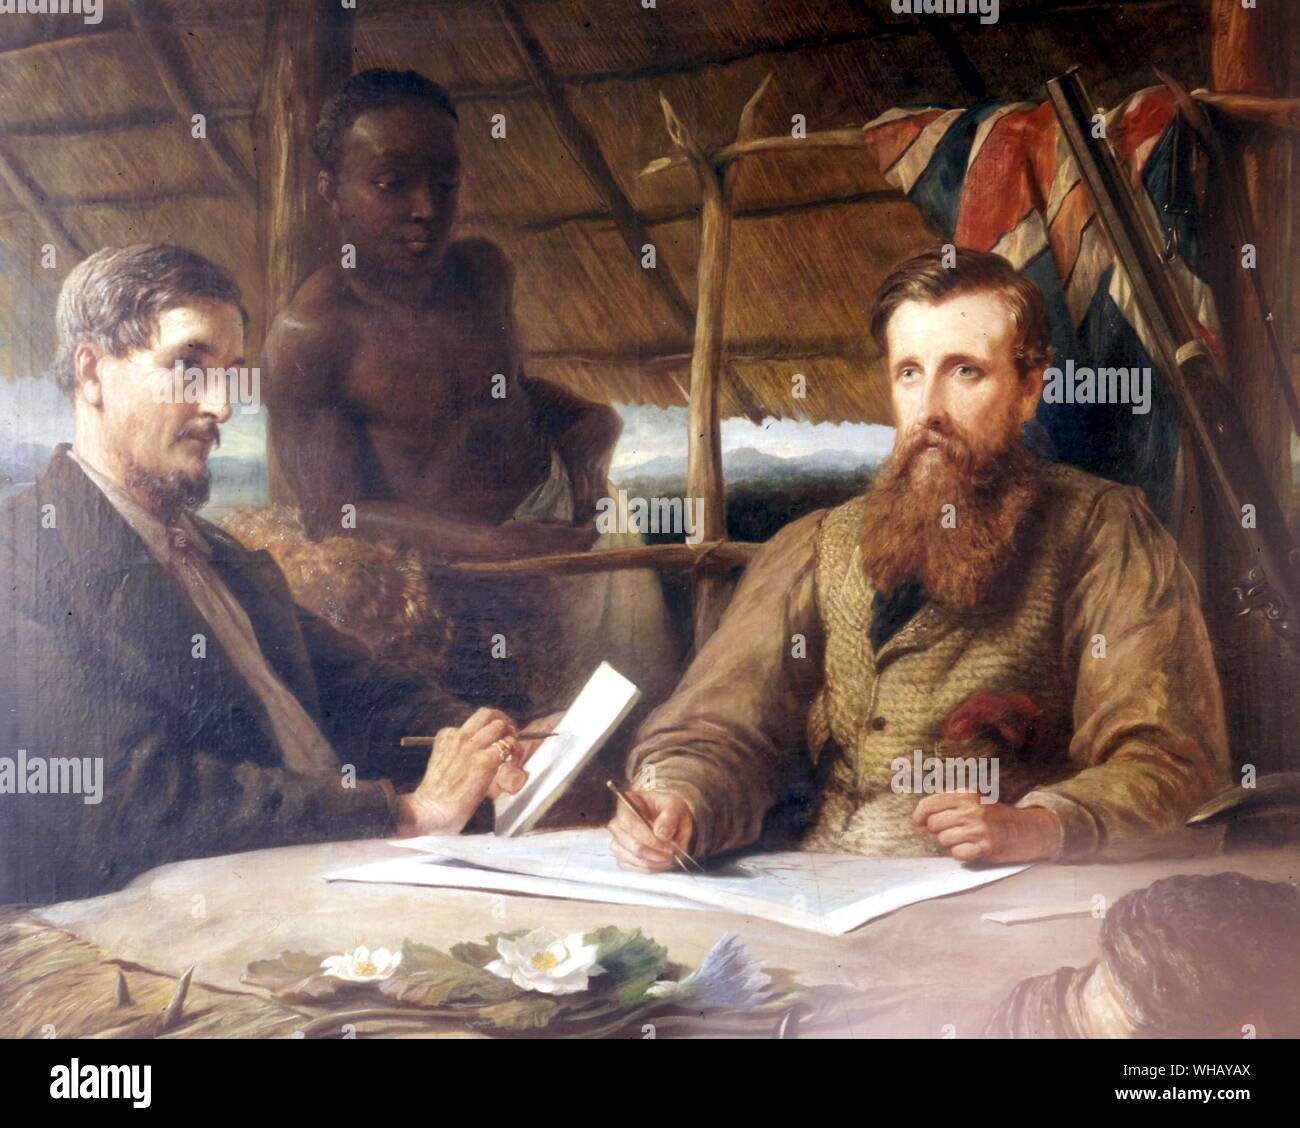 Speke (right), Grant and Bombay, their African assistant, in 1863. Painting by Henry William Phillips. The African Adventure - A History of Africa's Explorers by Timothy Severin, page 217. Stock Photo